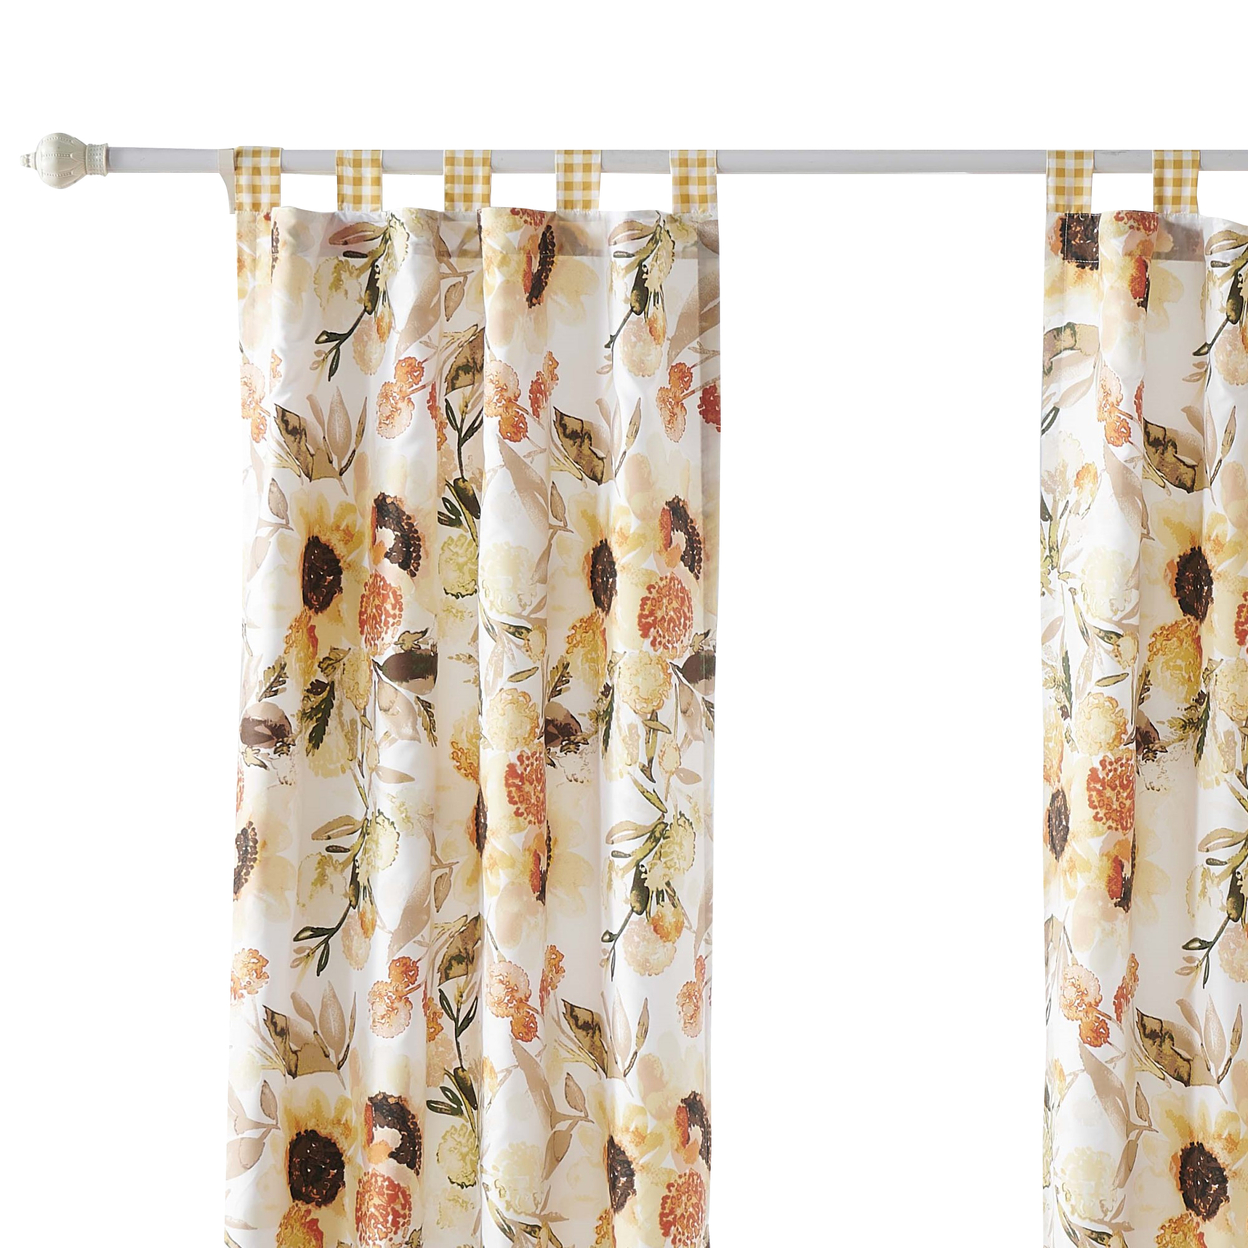 Kelsa Set Of 2 Panel Curtains With Watercolor Sunflowers, Ruffled, Gold